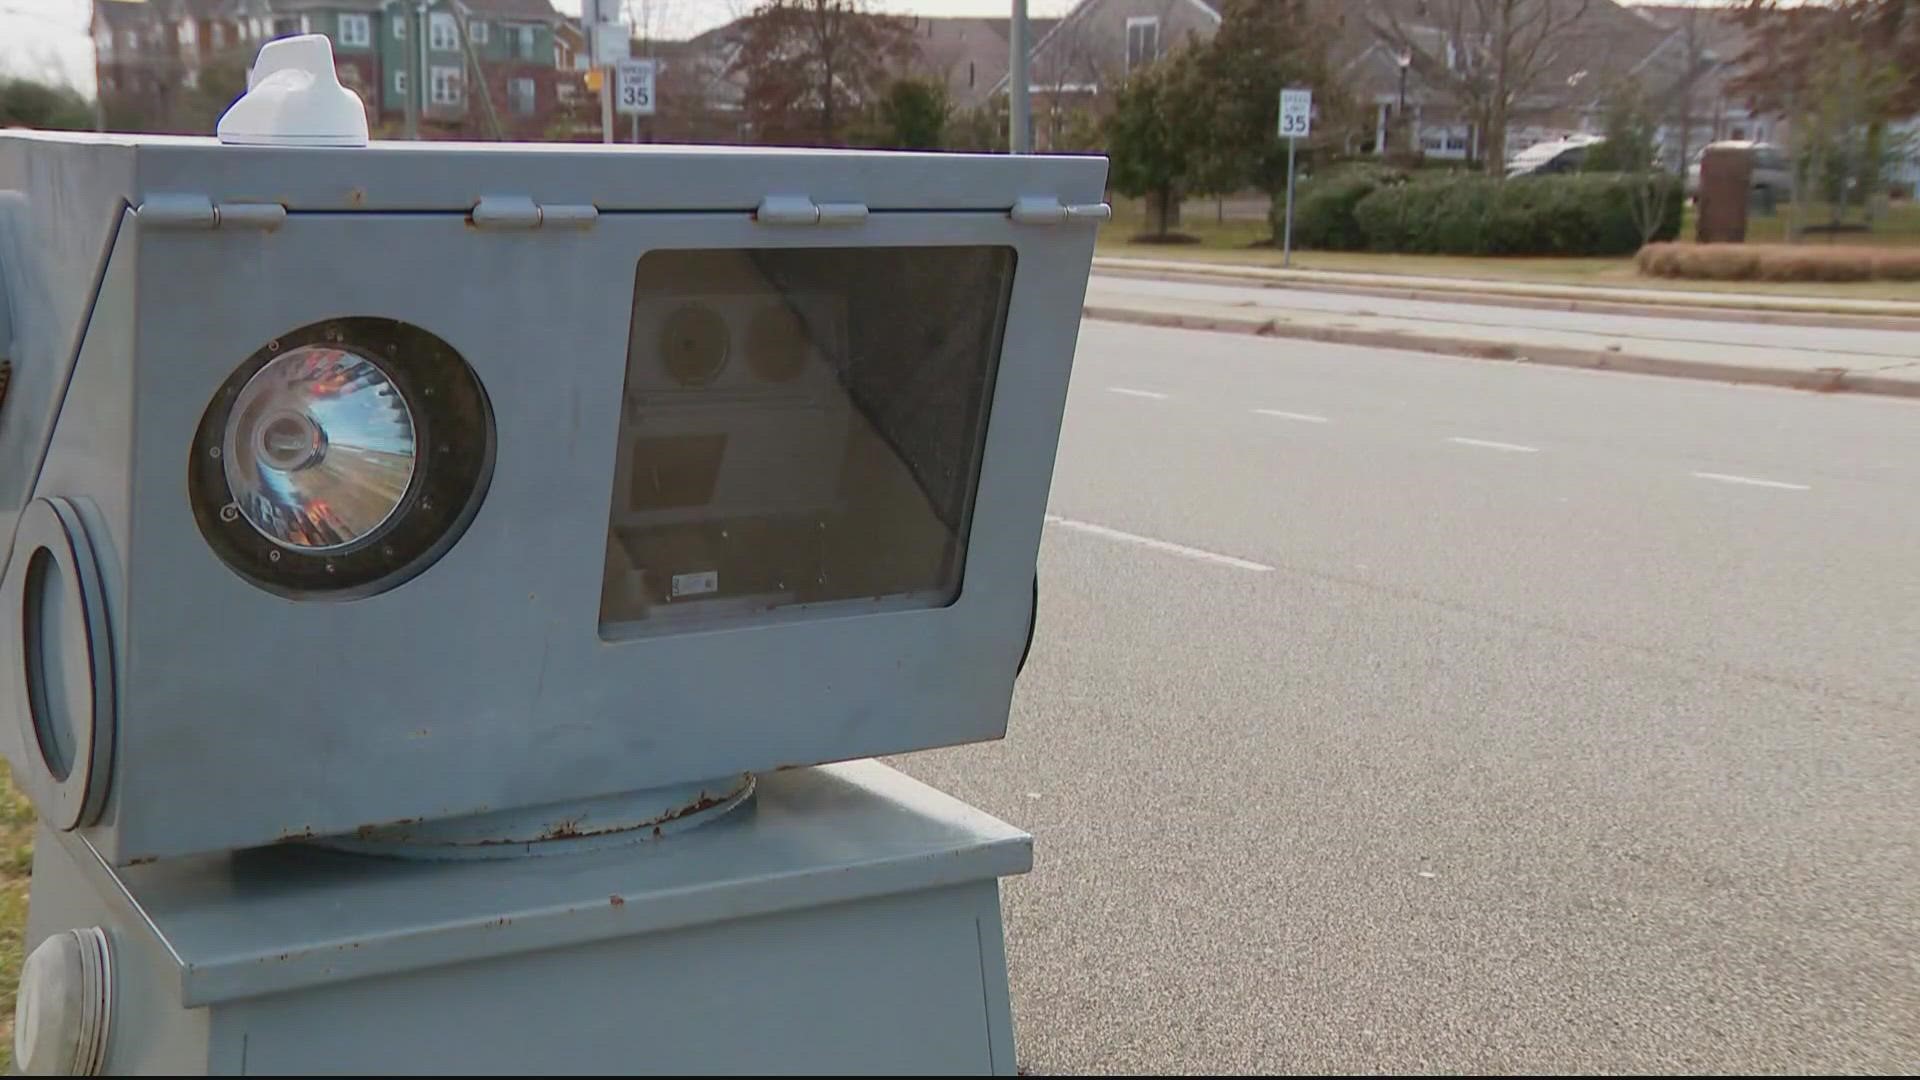 County officials hope the speed cameras will convince drivers to slow down and keep residents safe.